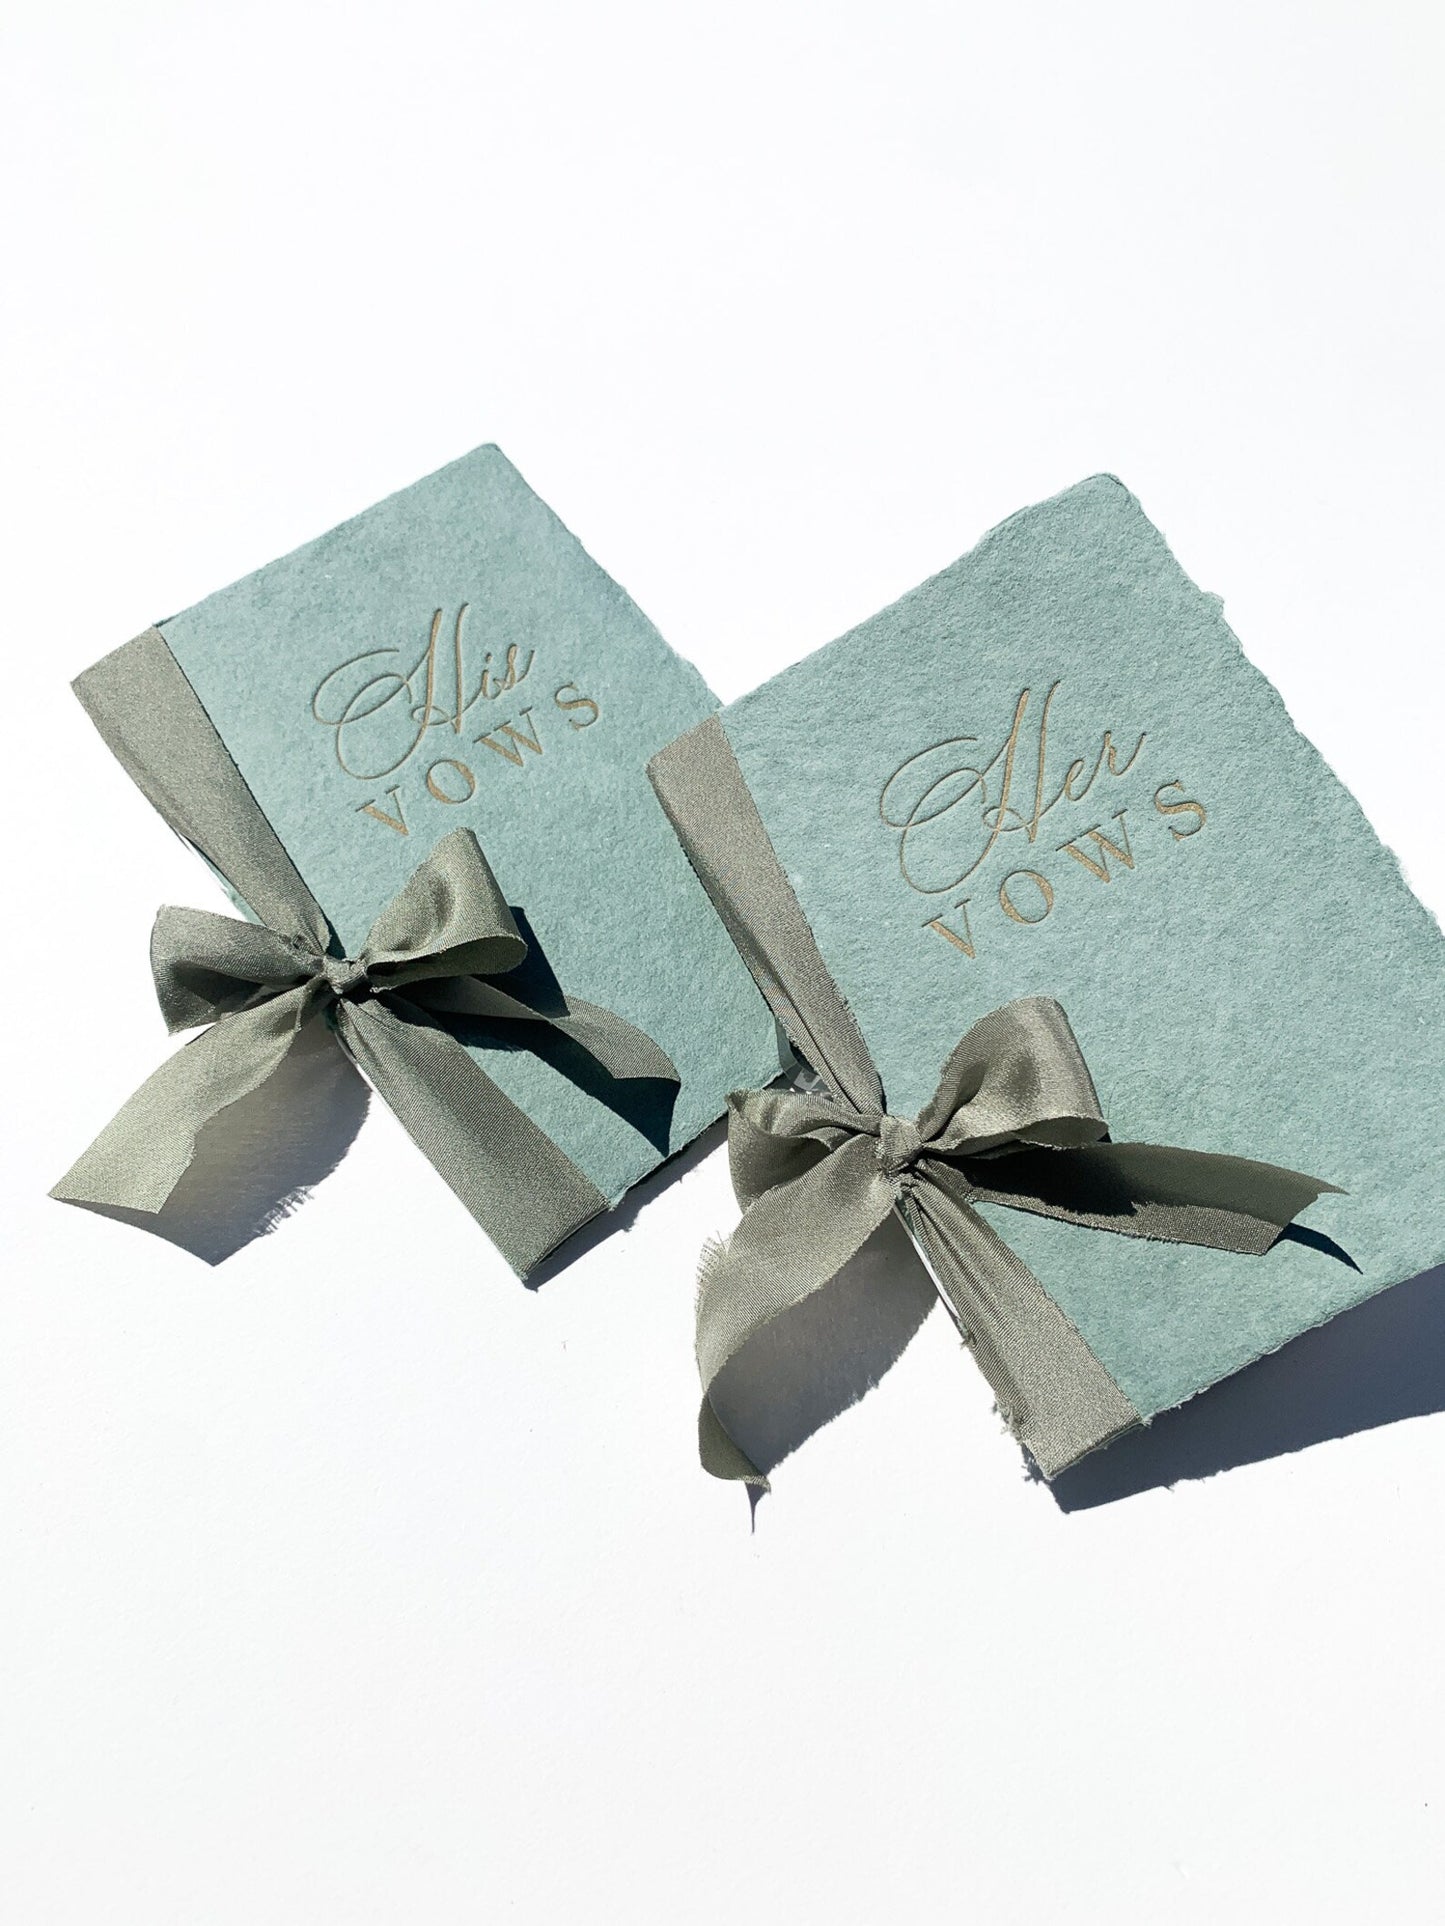 His and Hers Wedding Vow Book | Handmade Paper + Letterpress